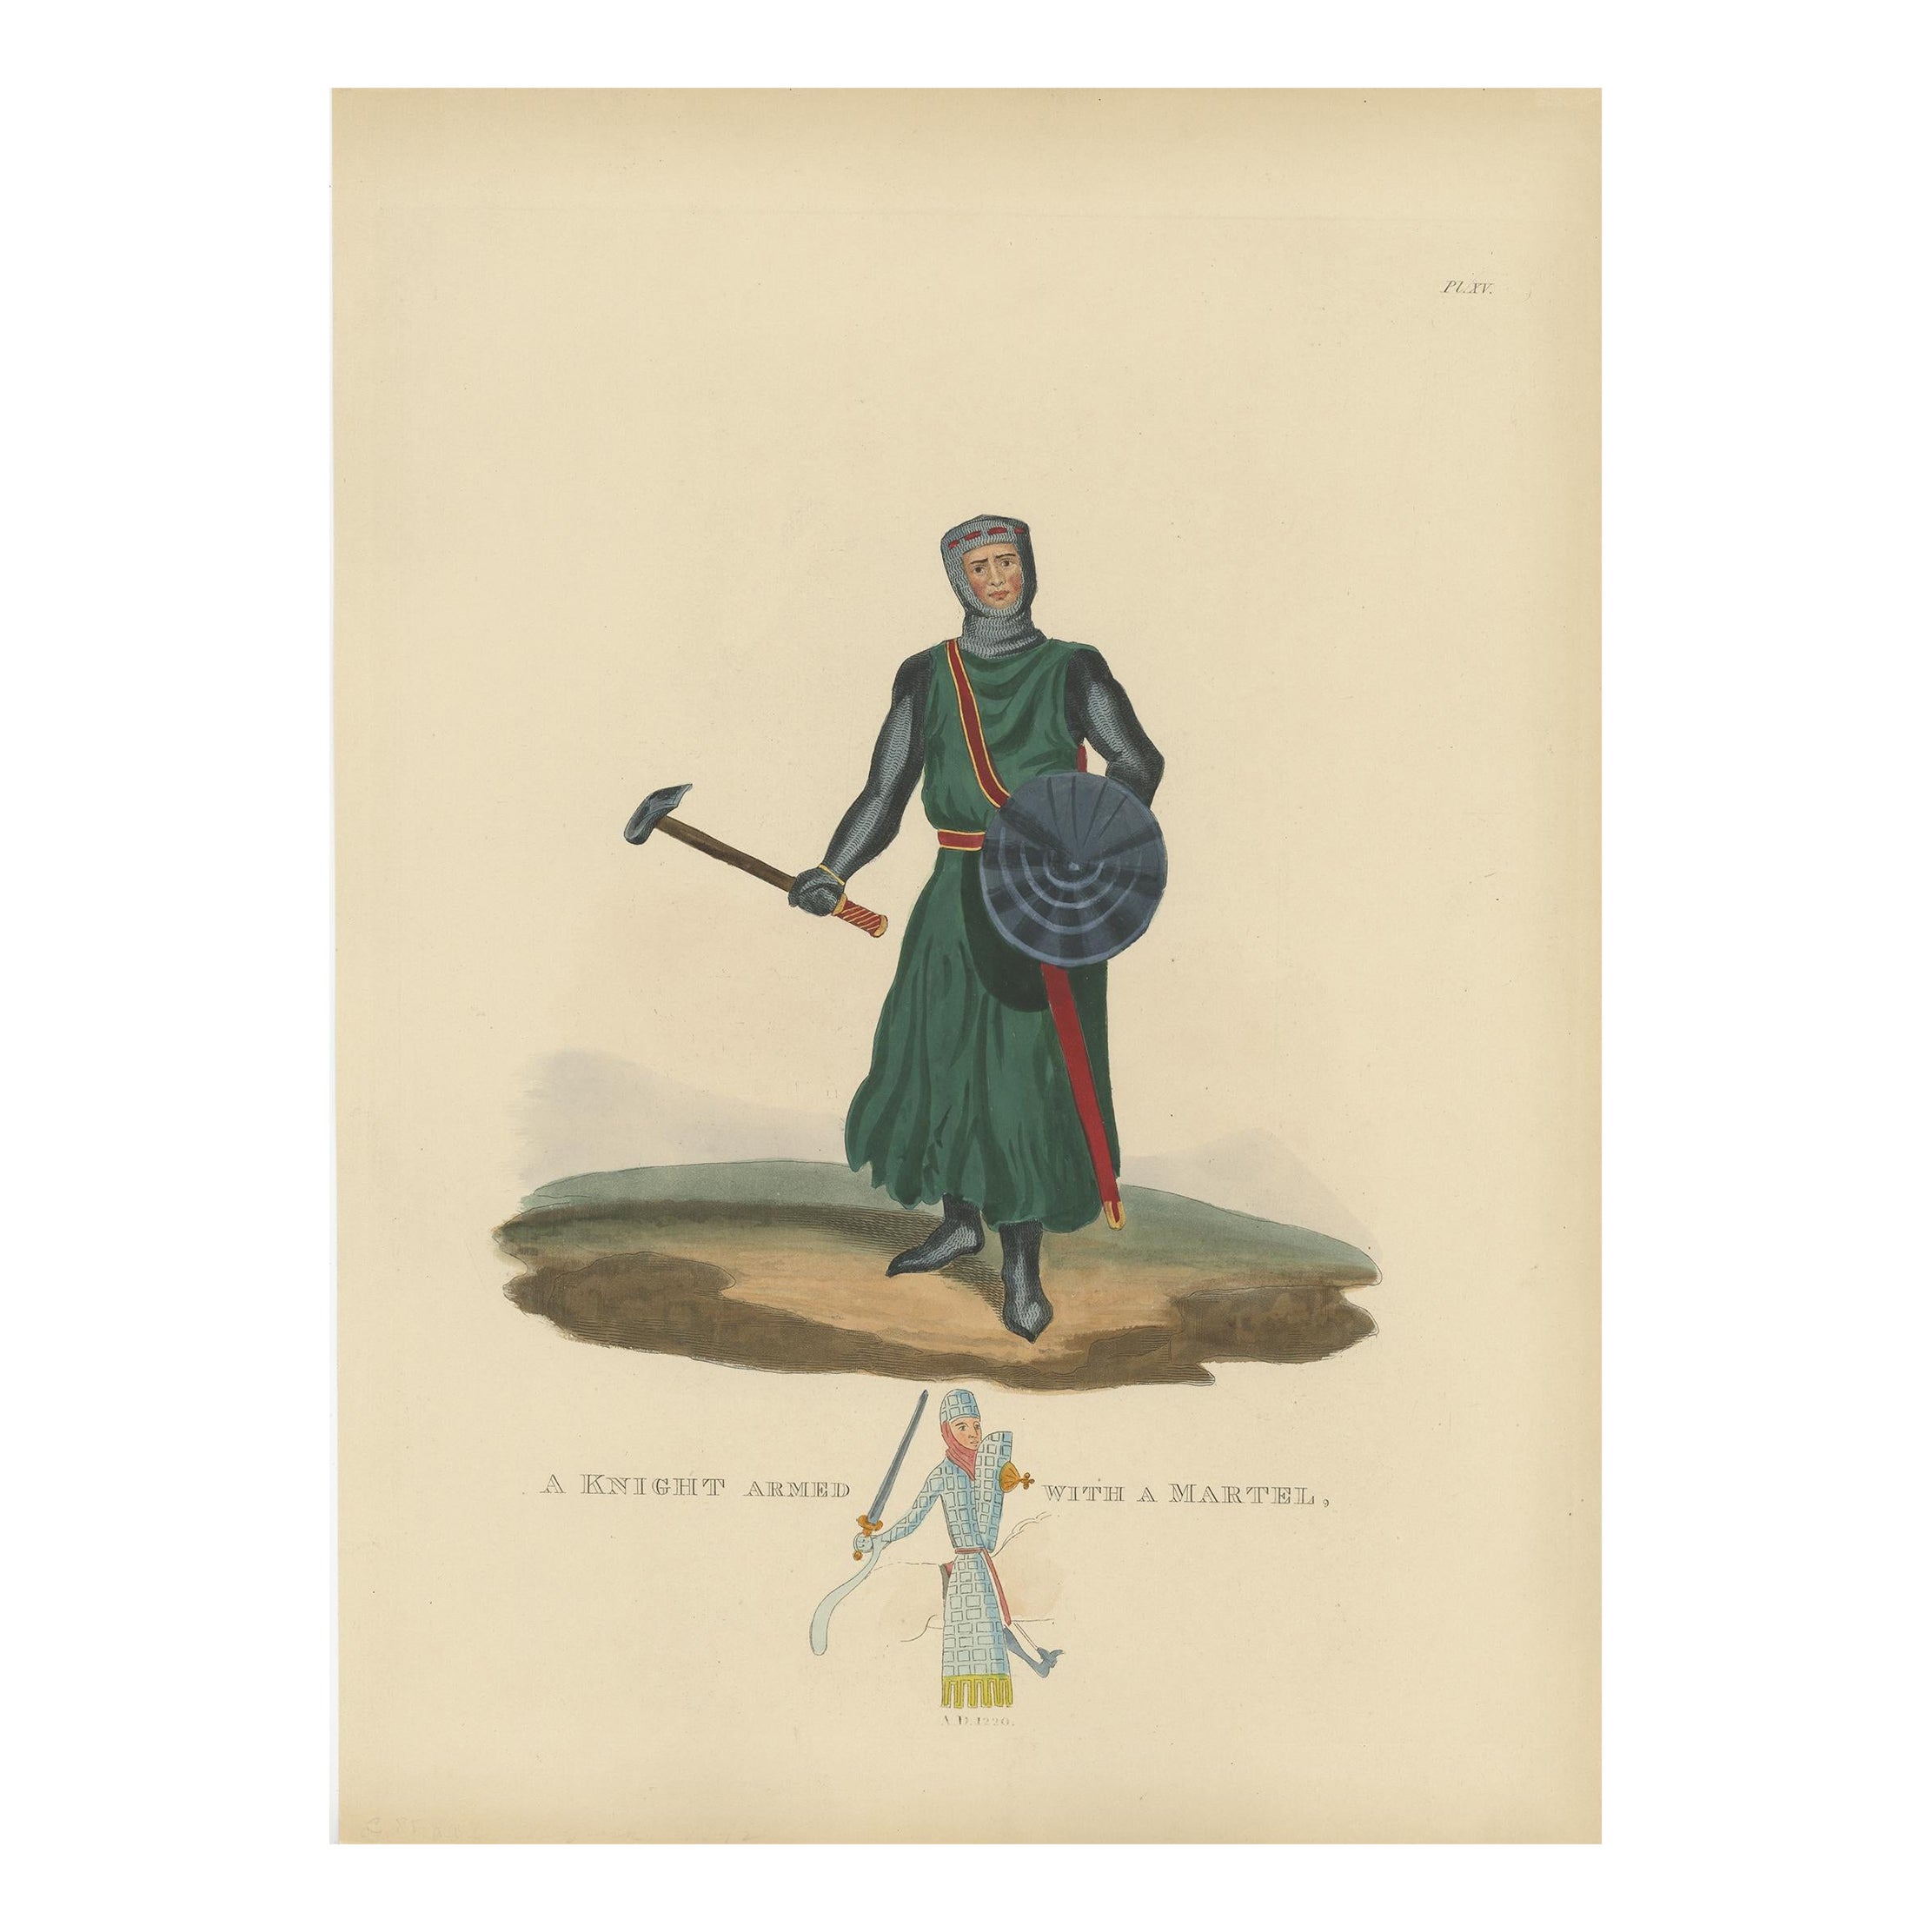 Genuine Antique Print of a Knight Armed with A Martel in Old Hand-Coloring, 1842 For Sale